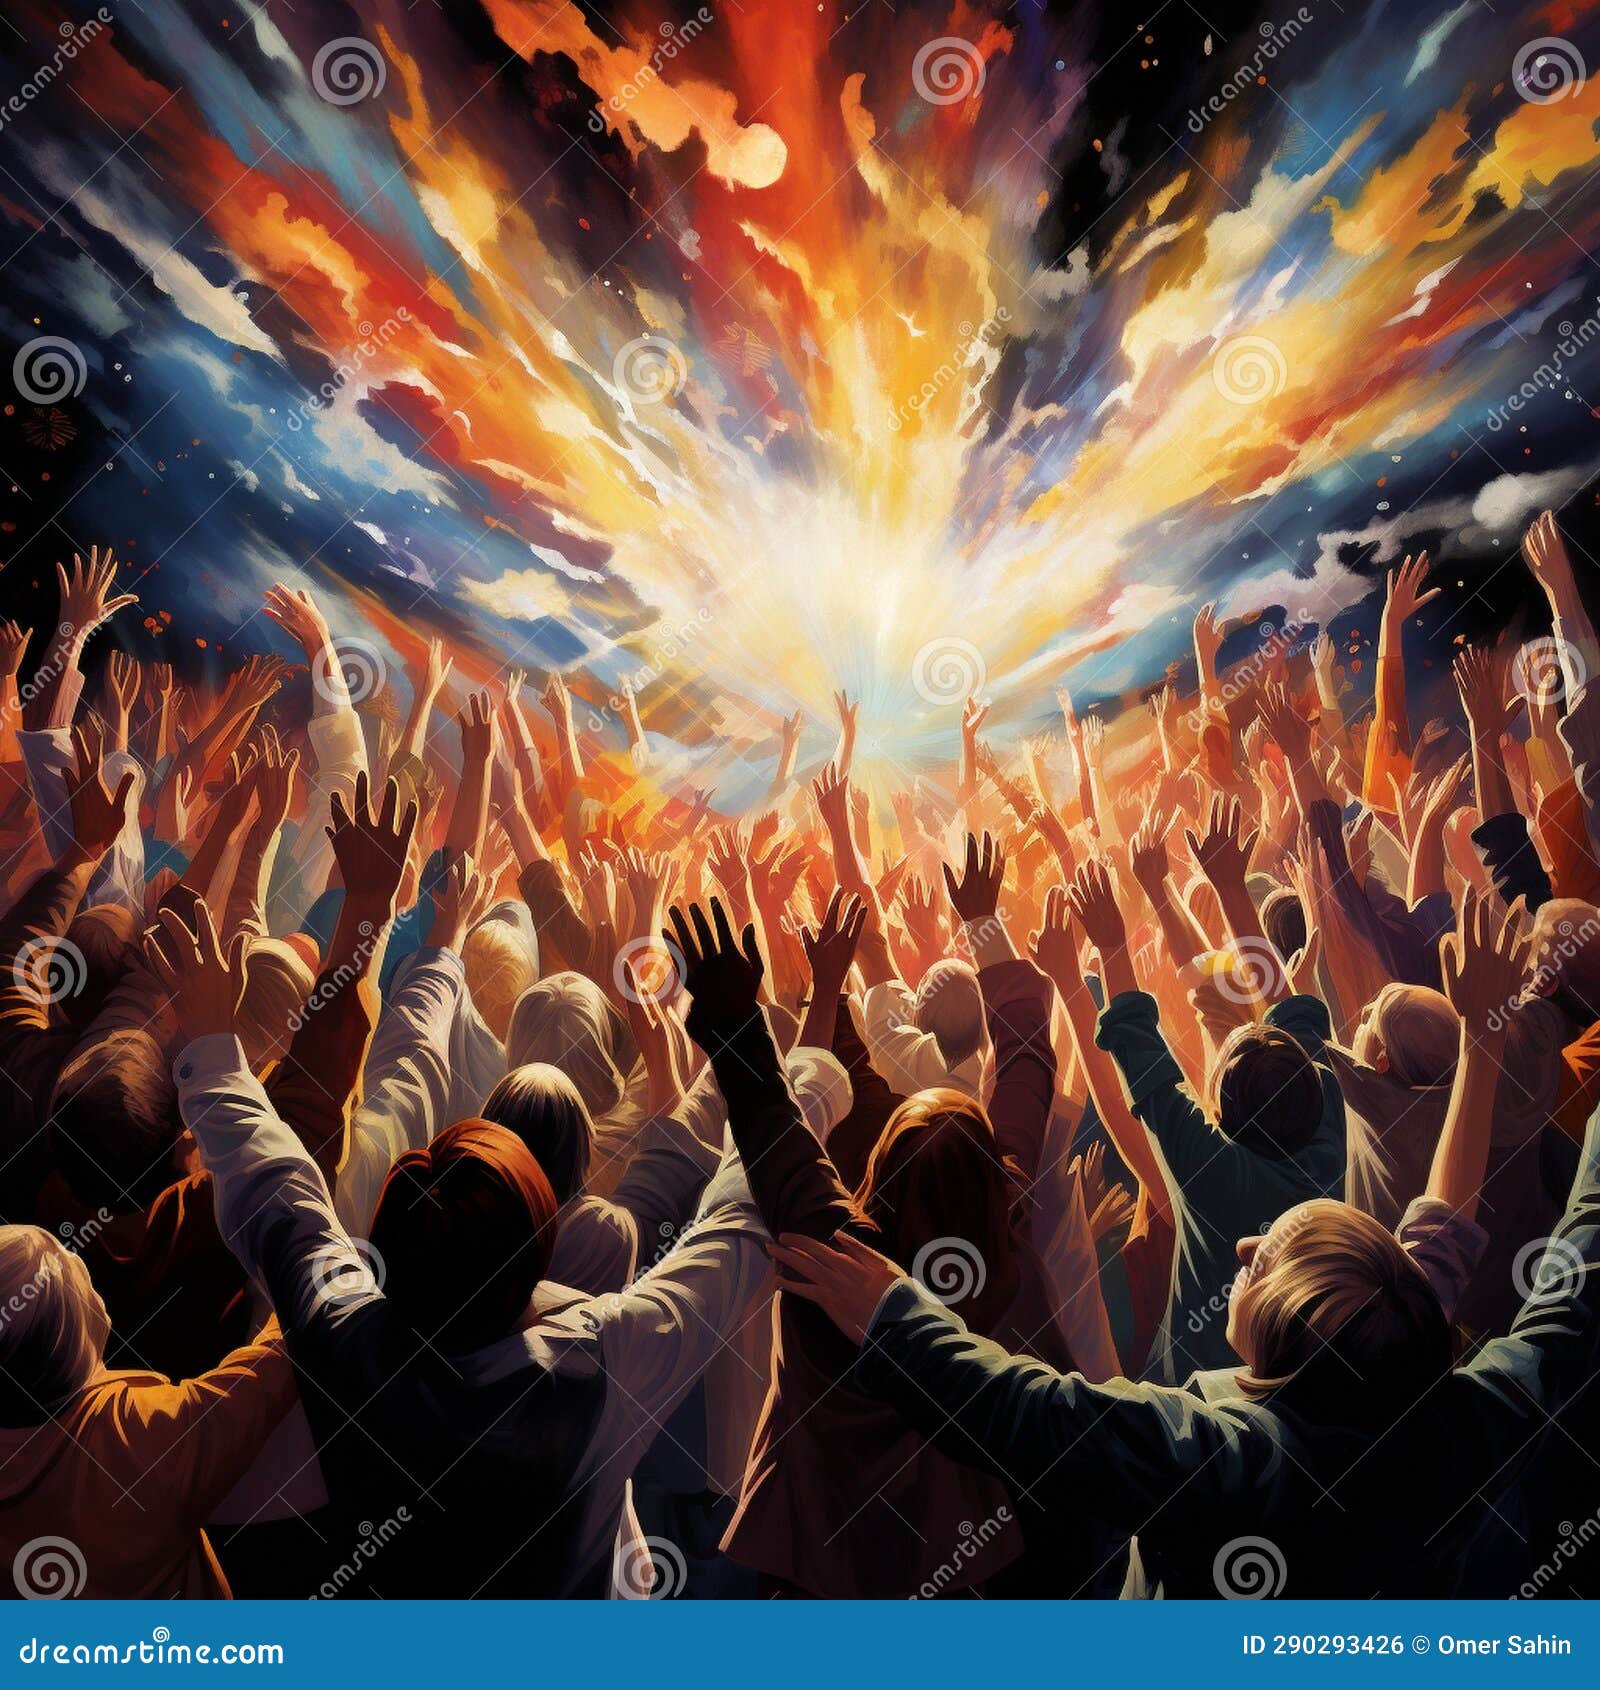 astonishing wallpaper: celestial crescendo - congregation lifting their hands in synchronized worship